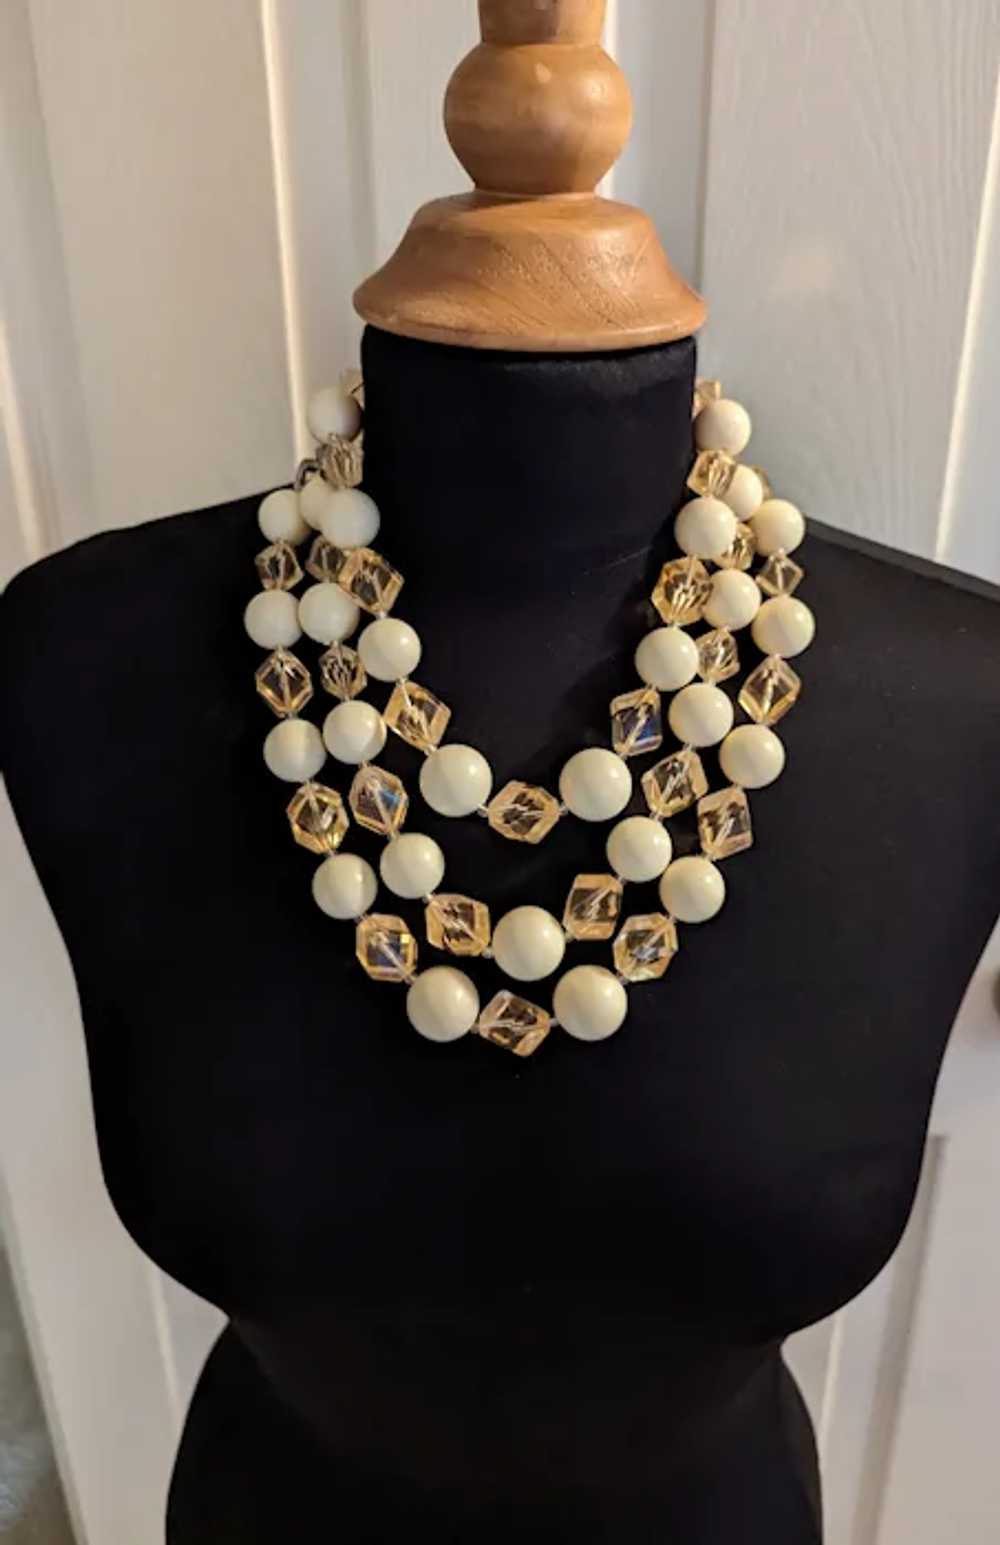 Extra Large Lucite and Baubles Bib Necklace - image 2